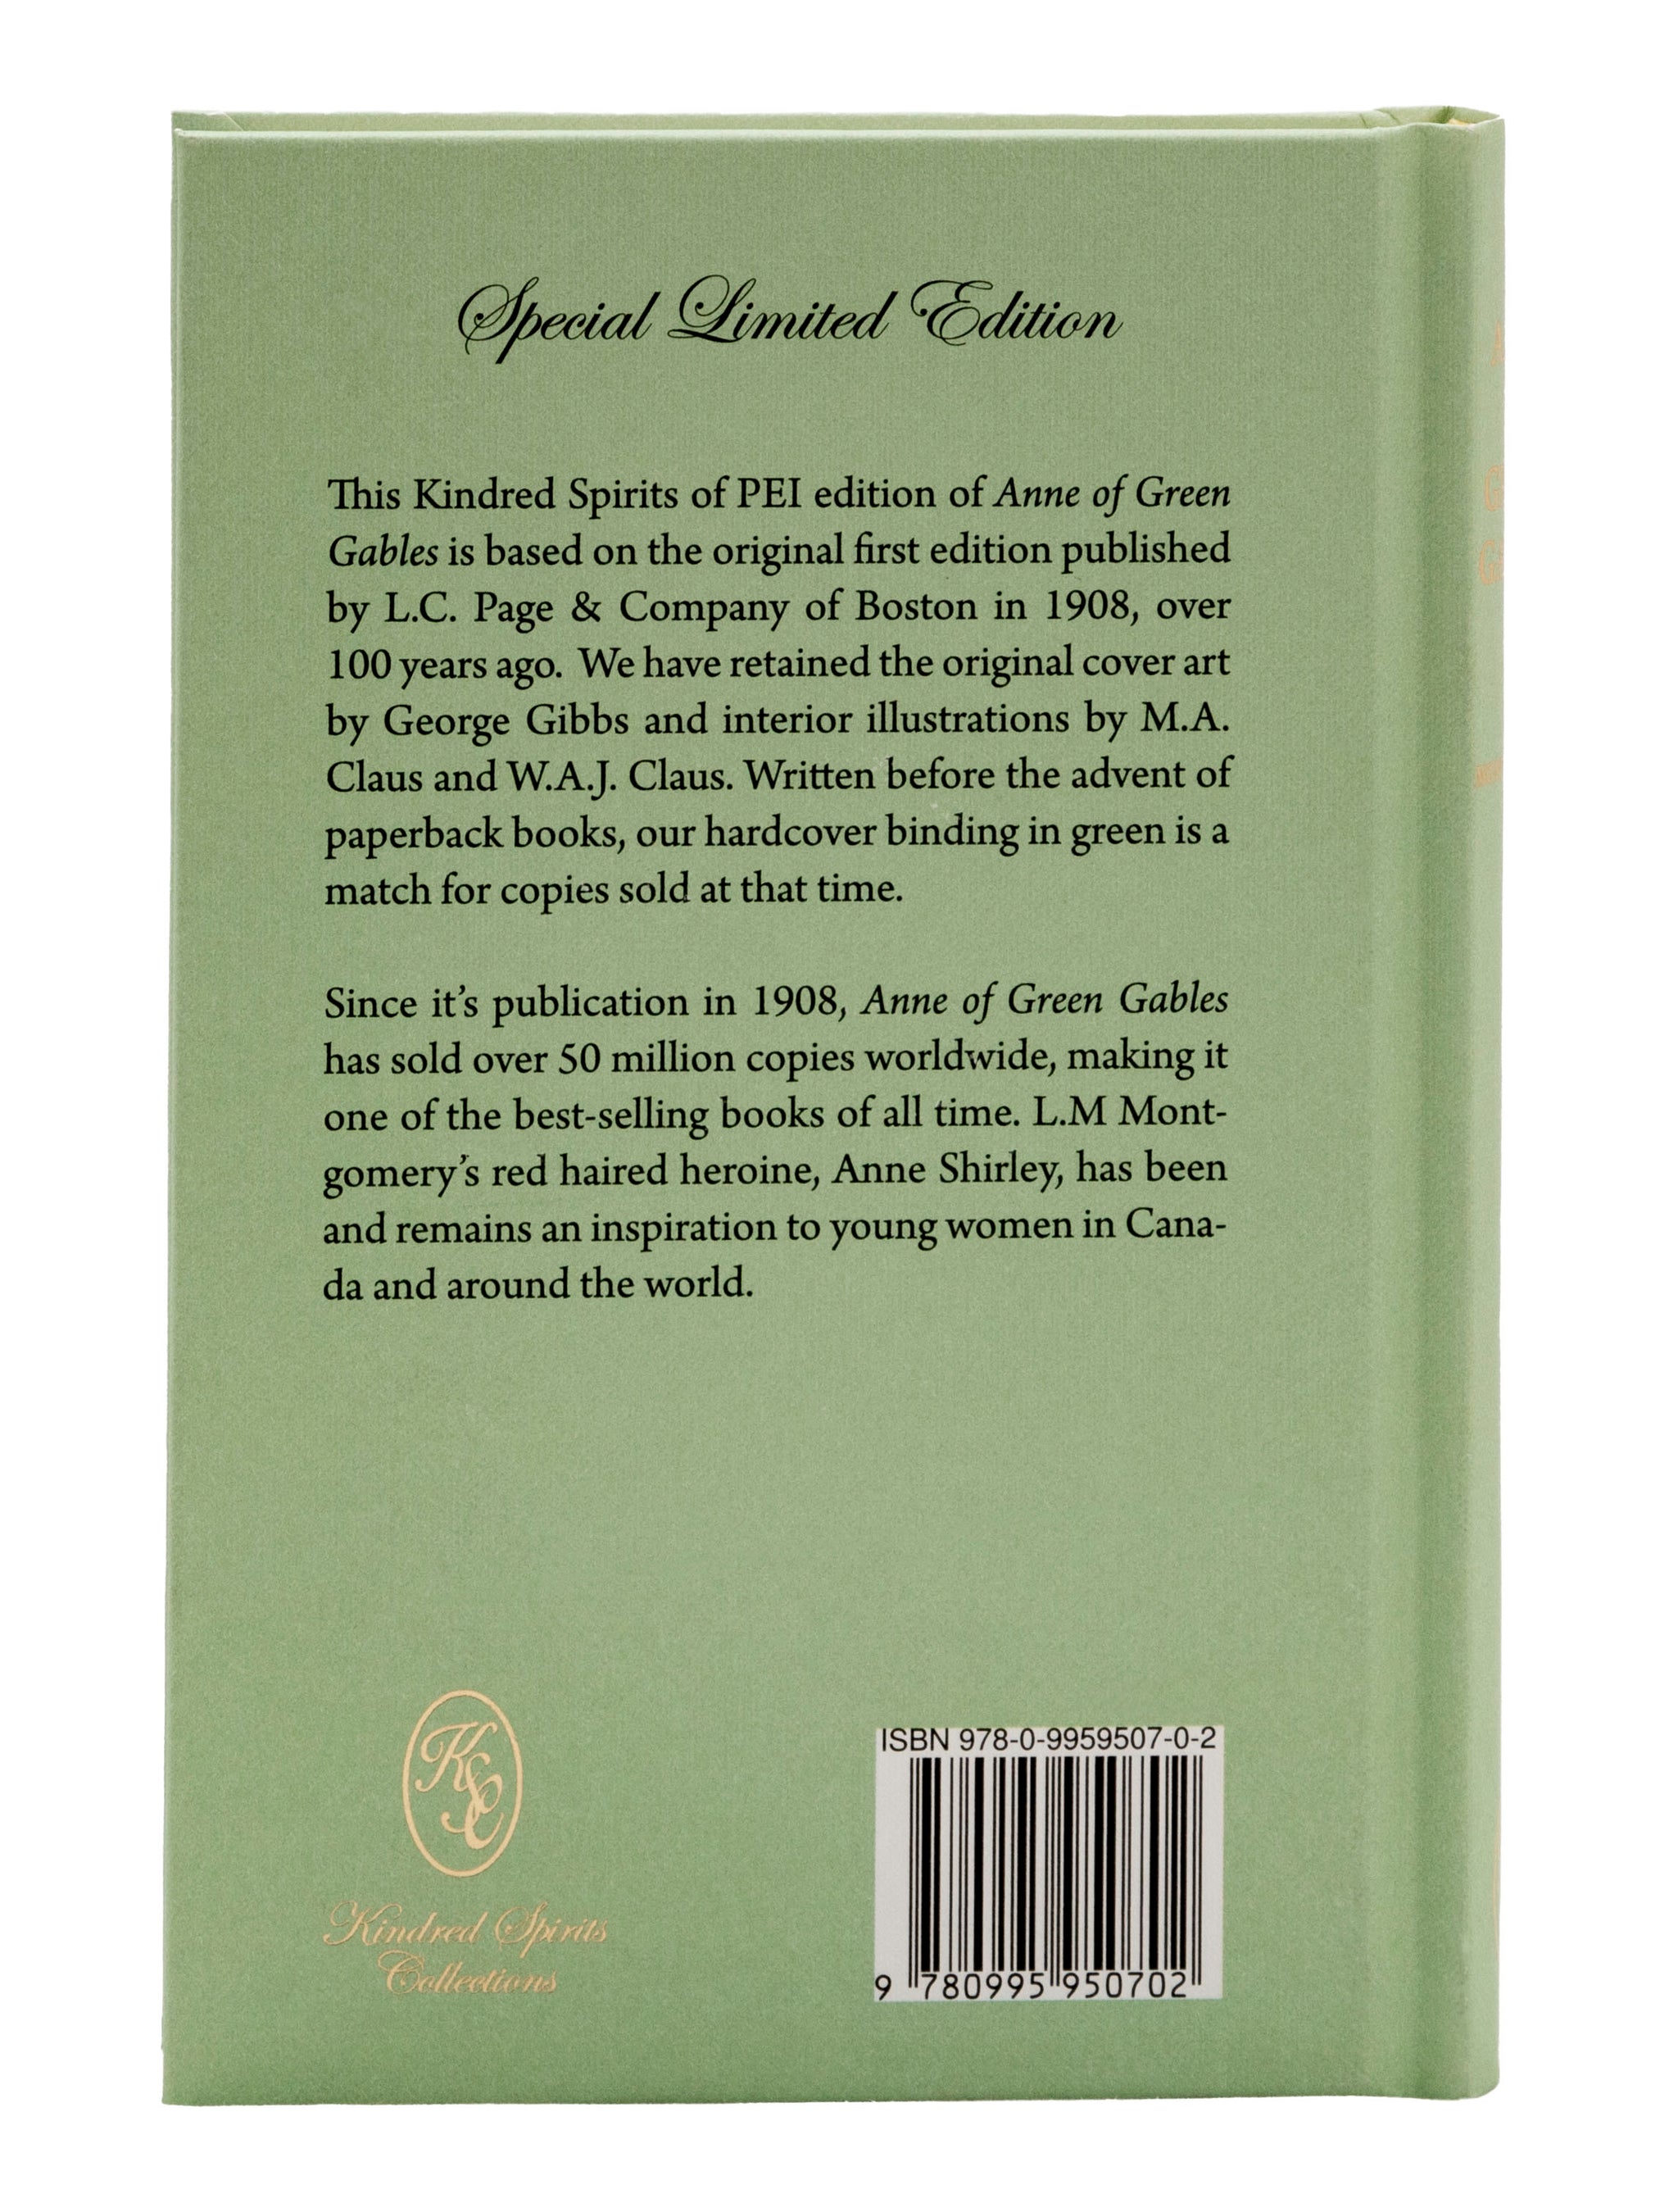 Anne of Green Gables - Special Limited Edition (Hardcover Book